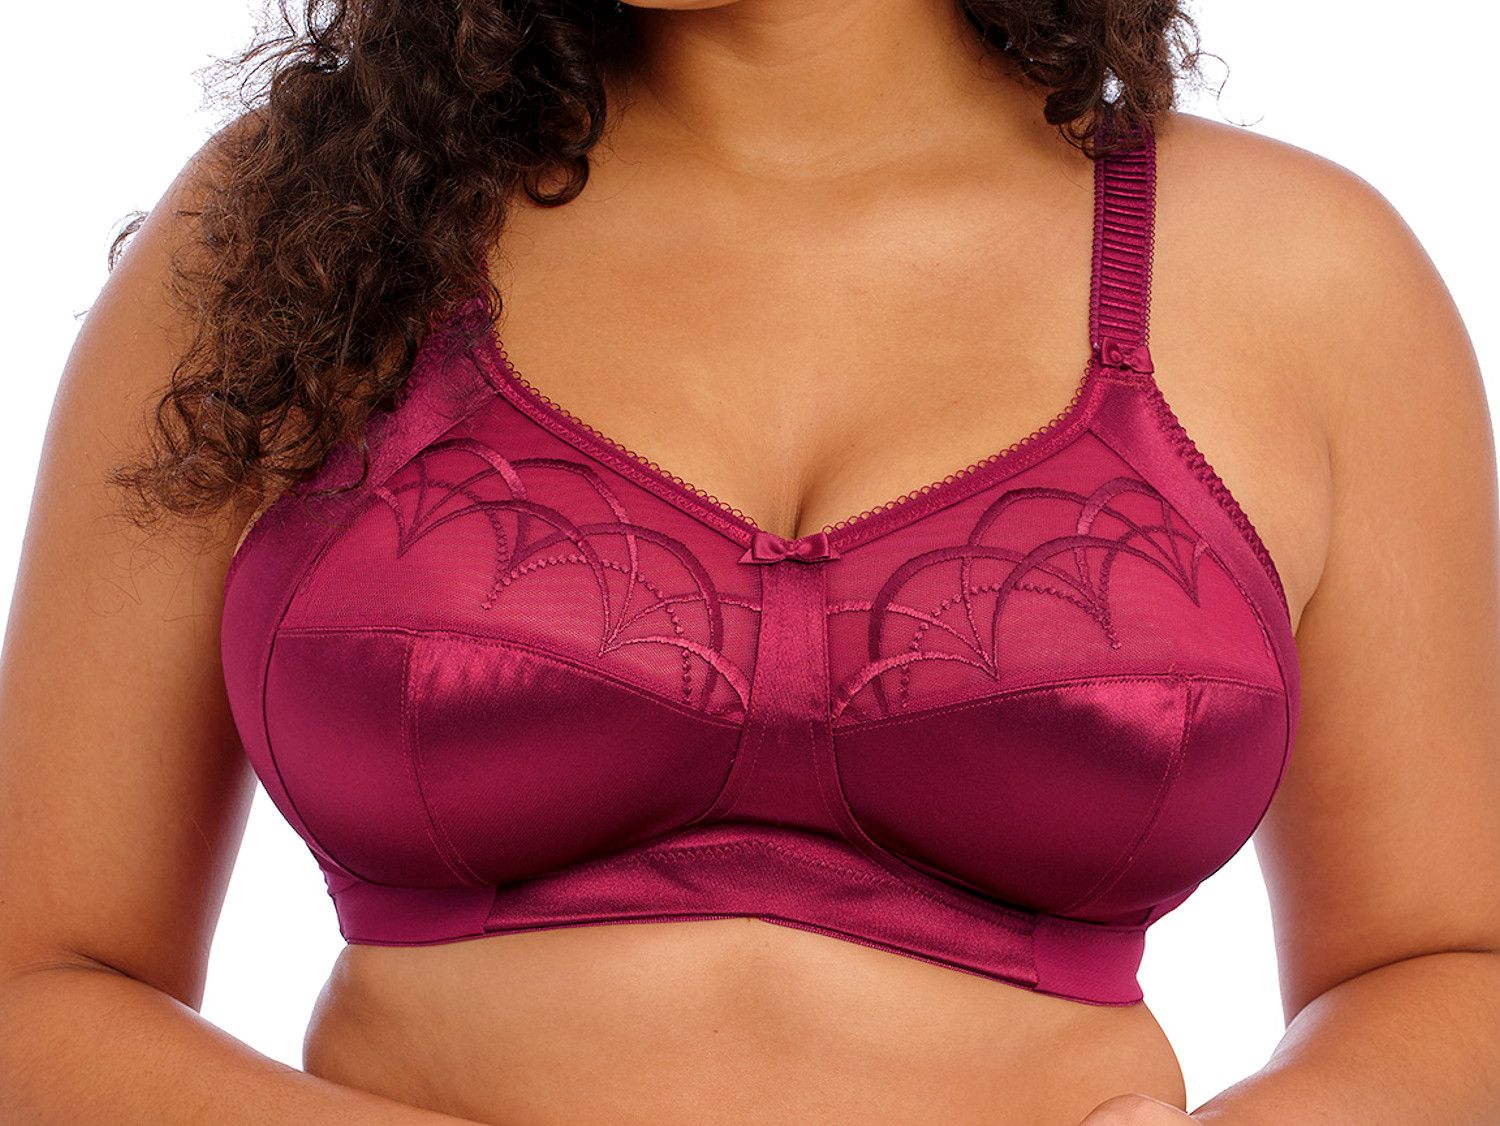 What is the Difference Between a Wired & Non-Wired Bra?